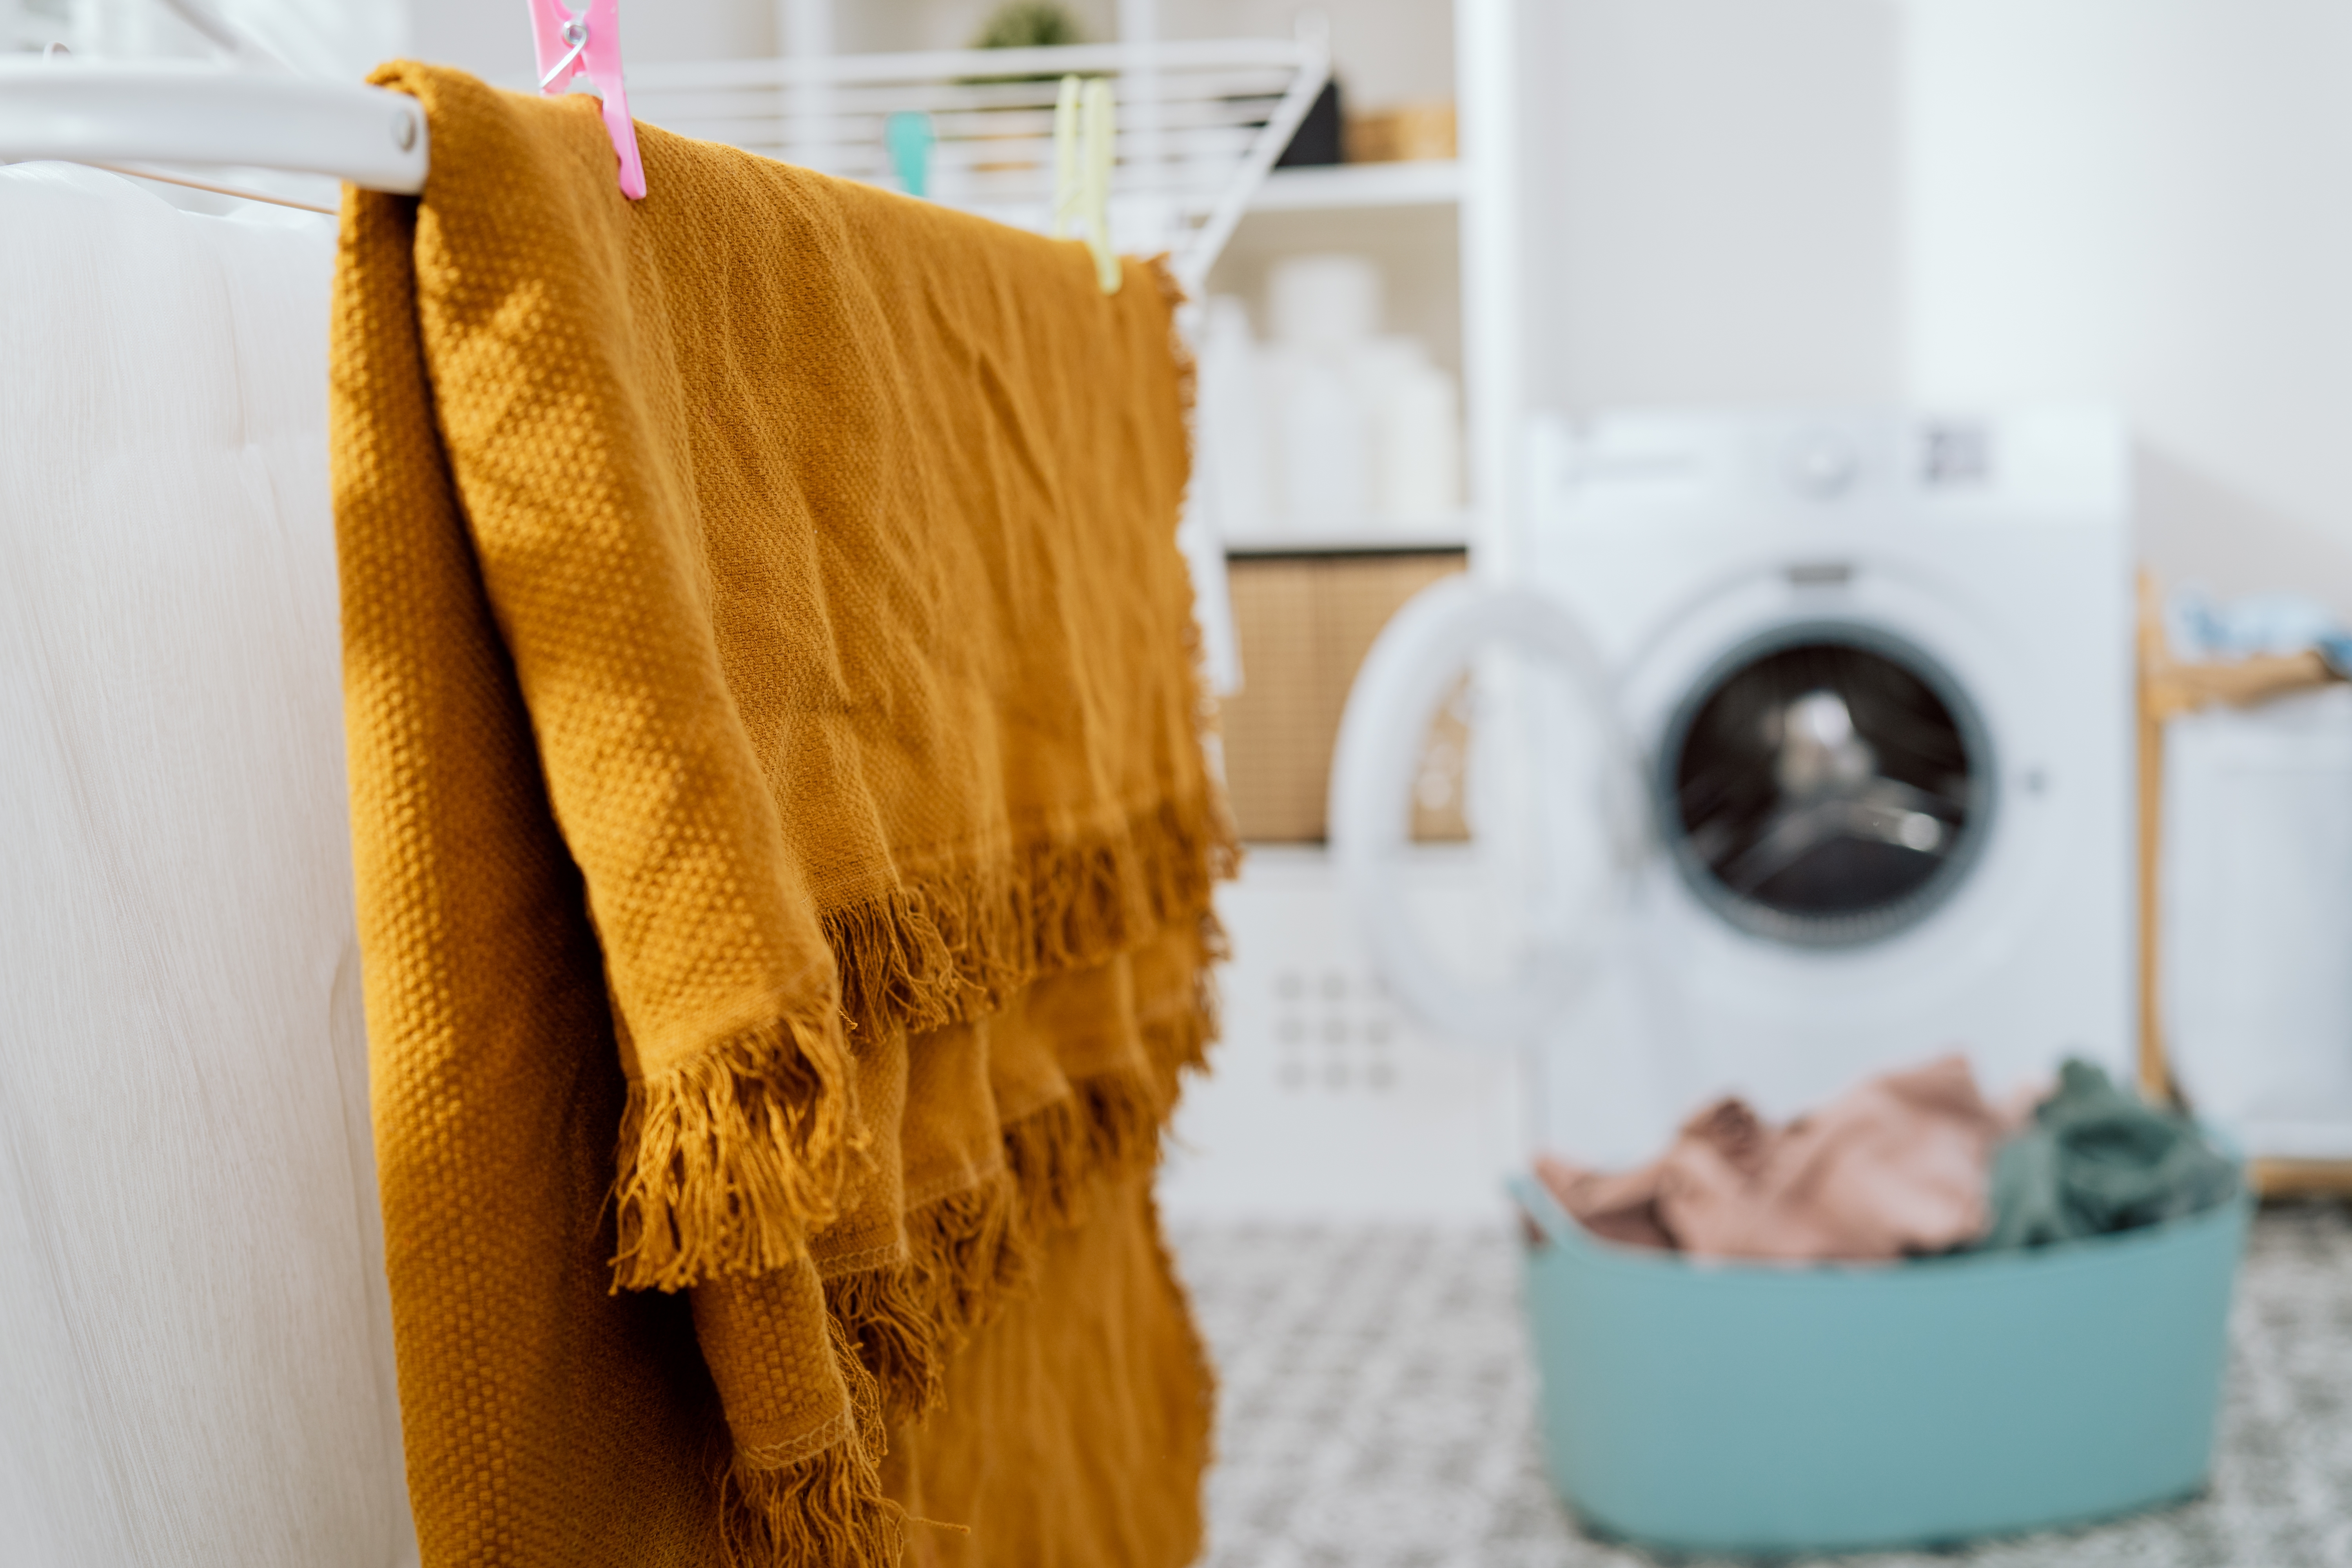 For optimal results, air-dry the Mexican blanket in a shaded area, away from direct sunlight. | Source: Shutterstock